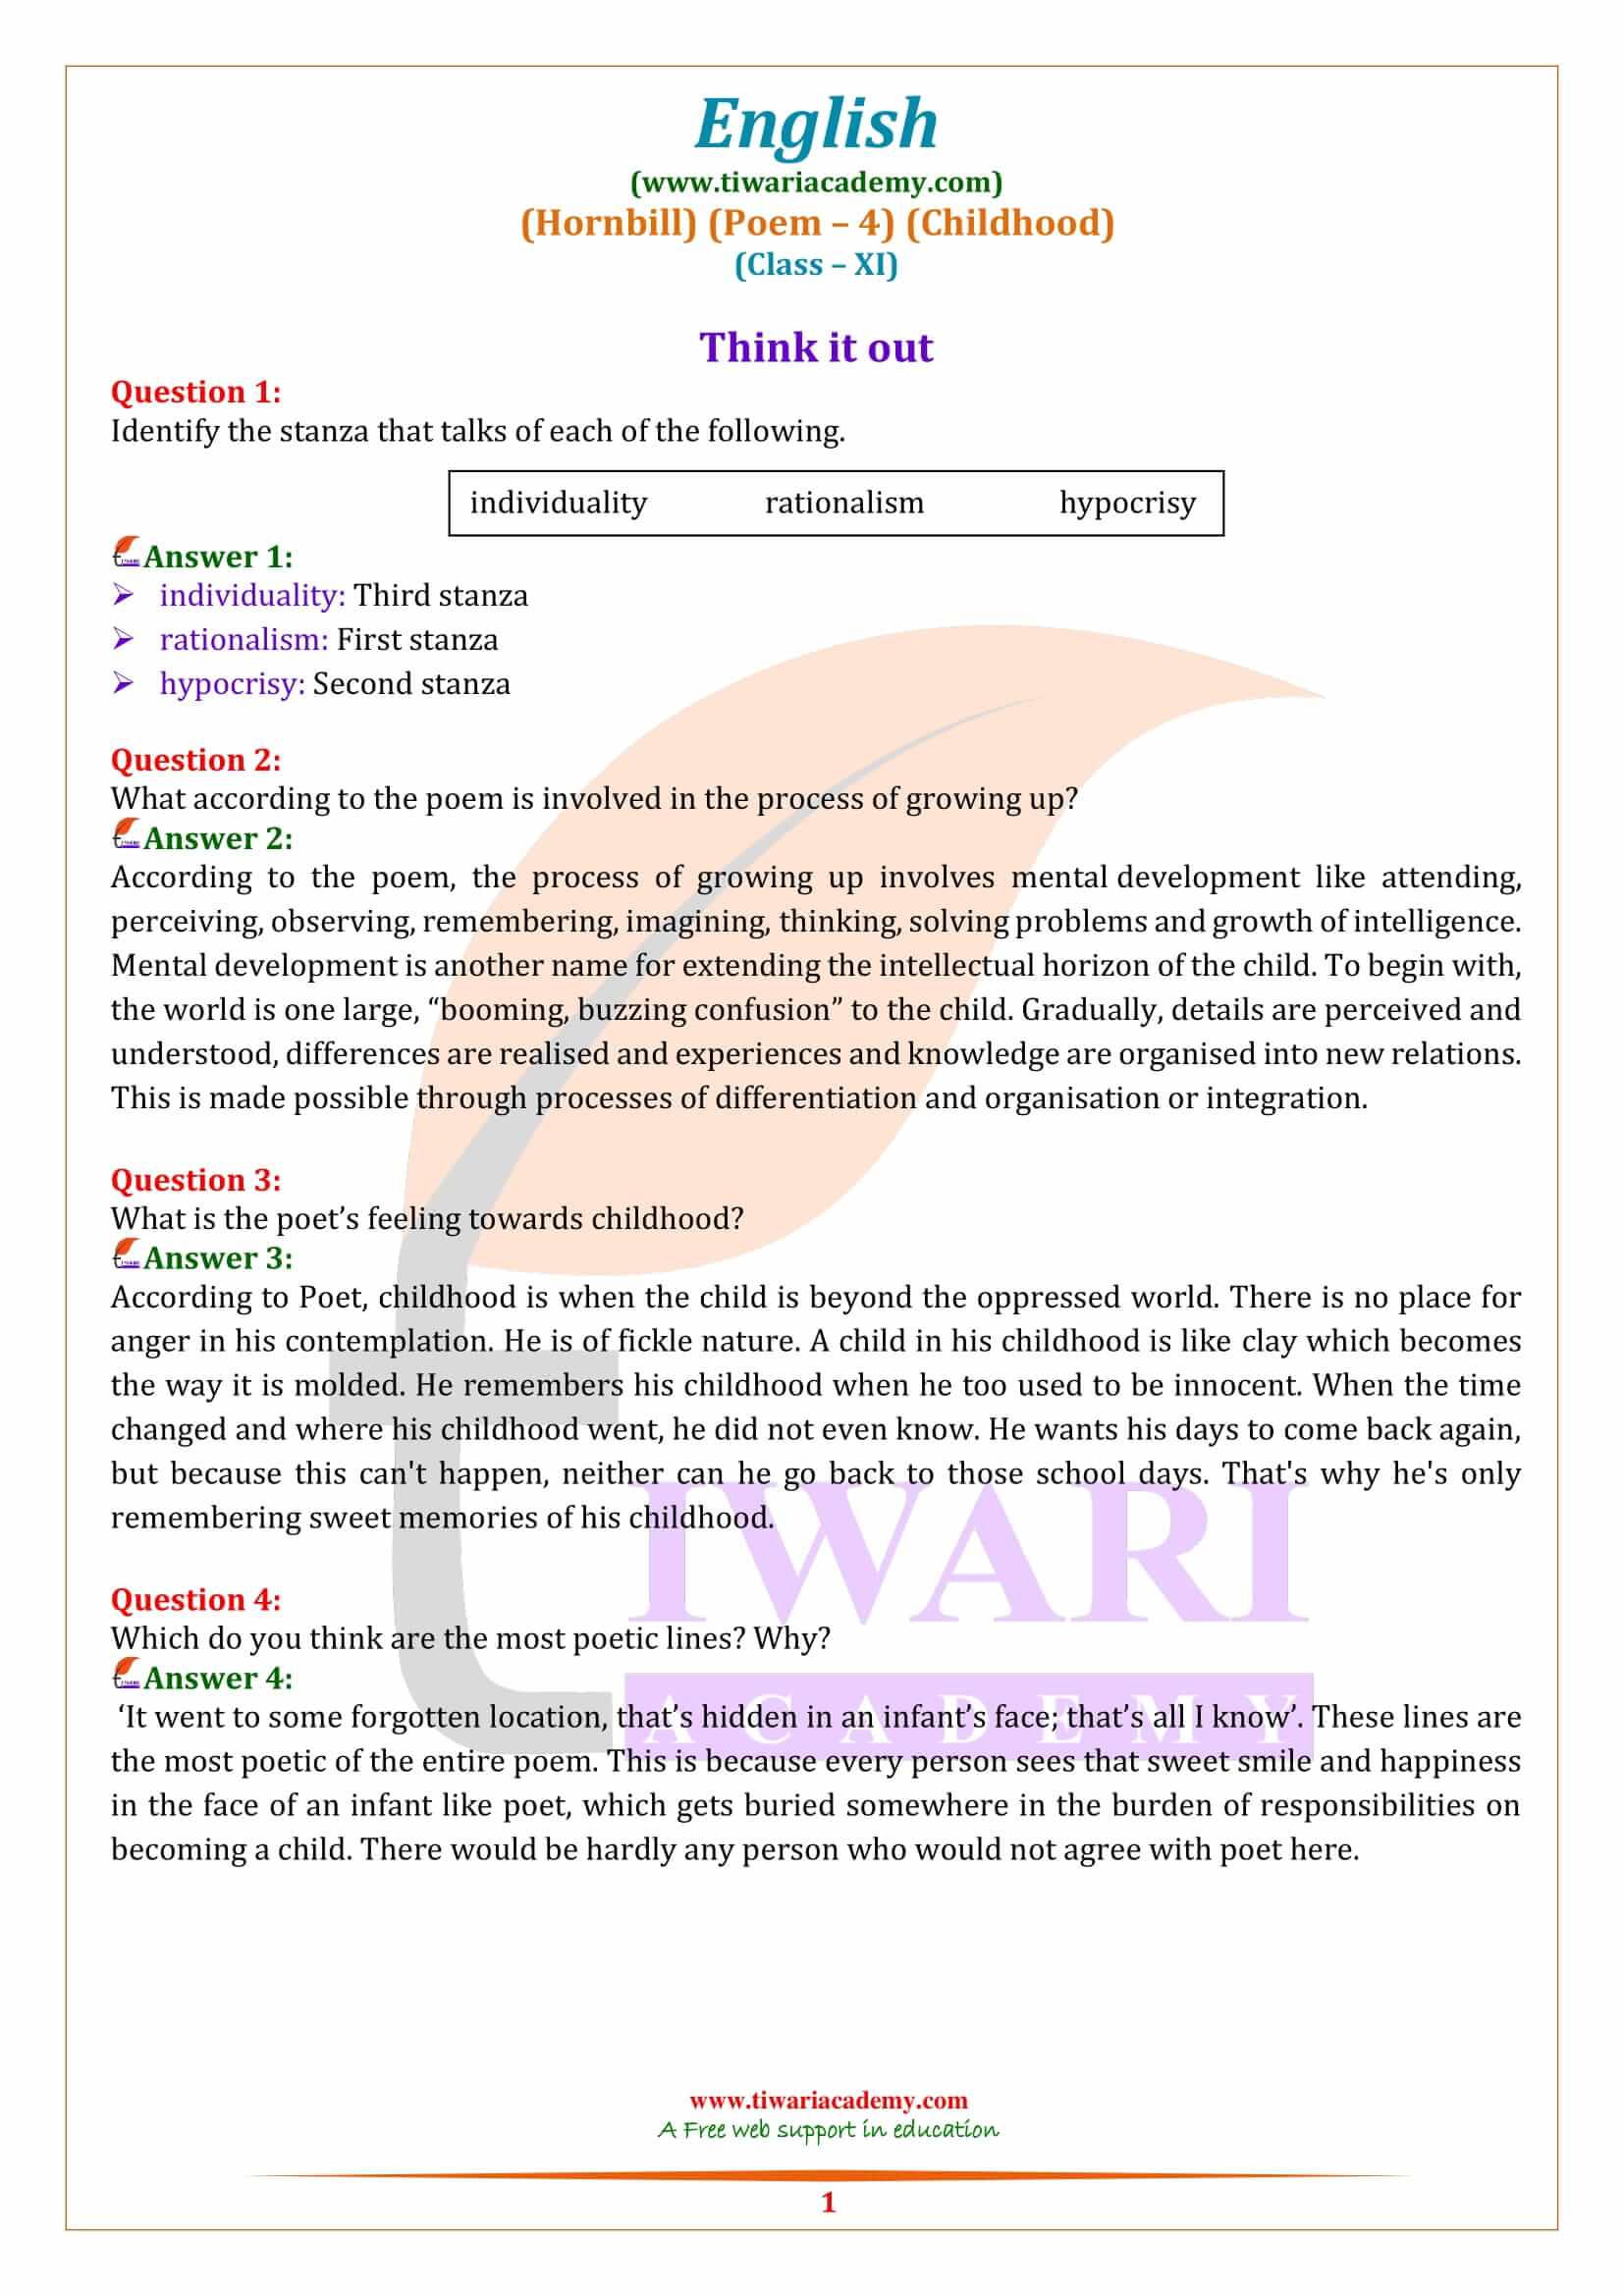 Class 11 English Hornbill Chapter 6 Poem Answers